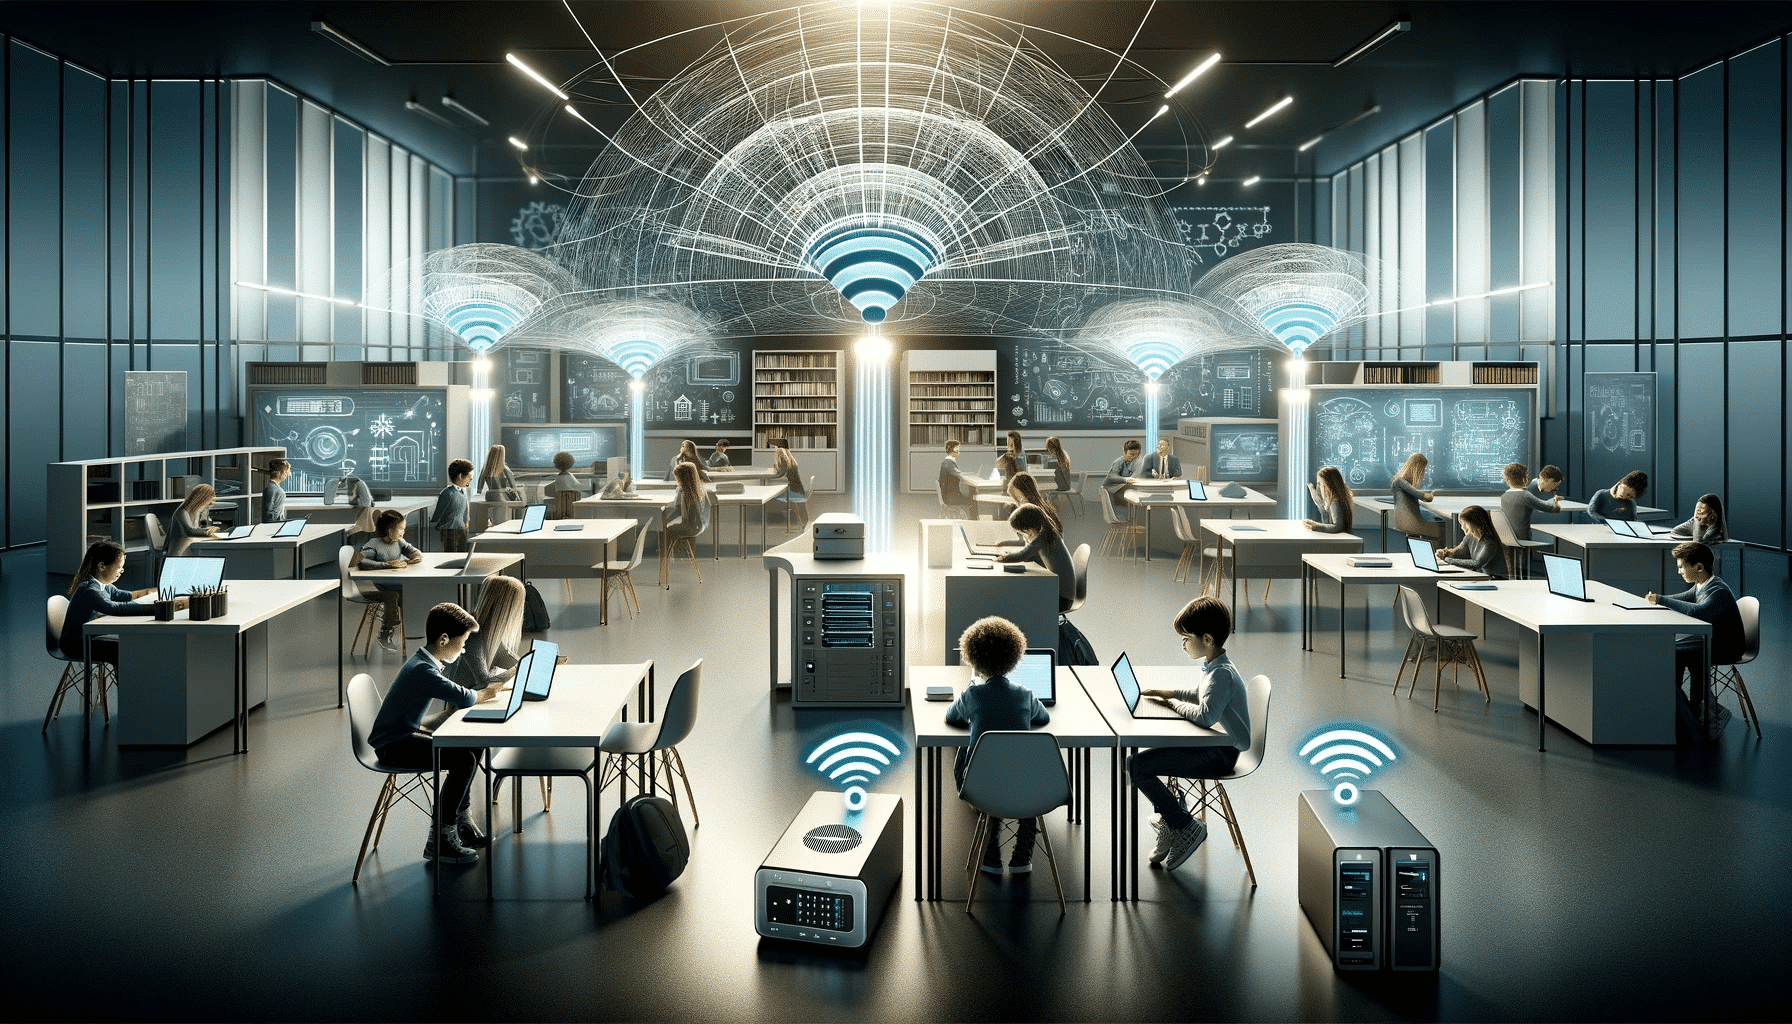 Header image of a modern digital school environment with students of various backgrounds using tablets and laptops, connected to a high-speed Wi-Fi network, symbolized by stylized Wi-Fi signals, with subtly integrated equipment such as routers and access points, highlighted by the logo of Ascend GmbH, symbolizing their role in providing these solutions, in a futuristic, clean and professional style, appealing to educators and technology professionals. Keywords: WiFi, digital school.